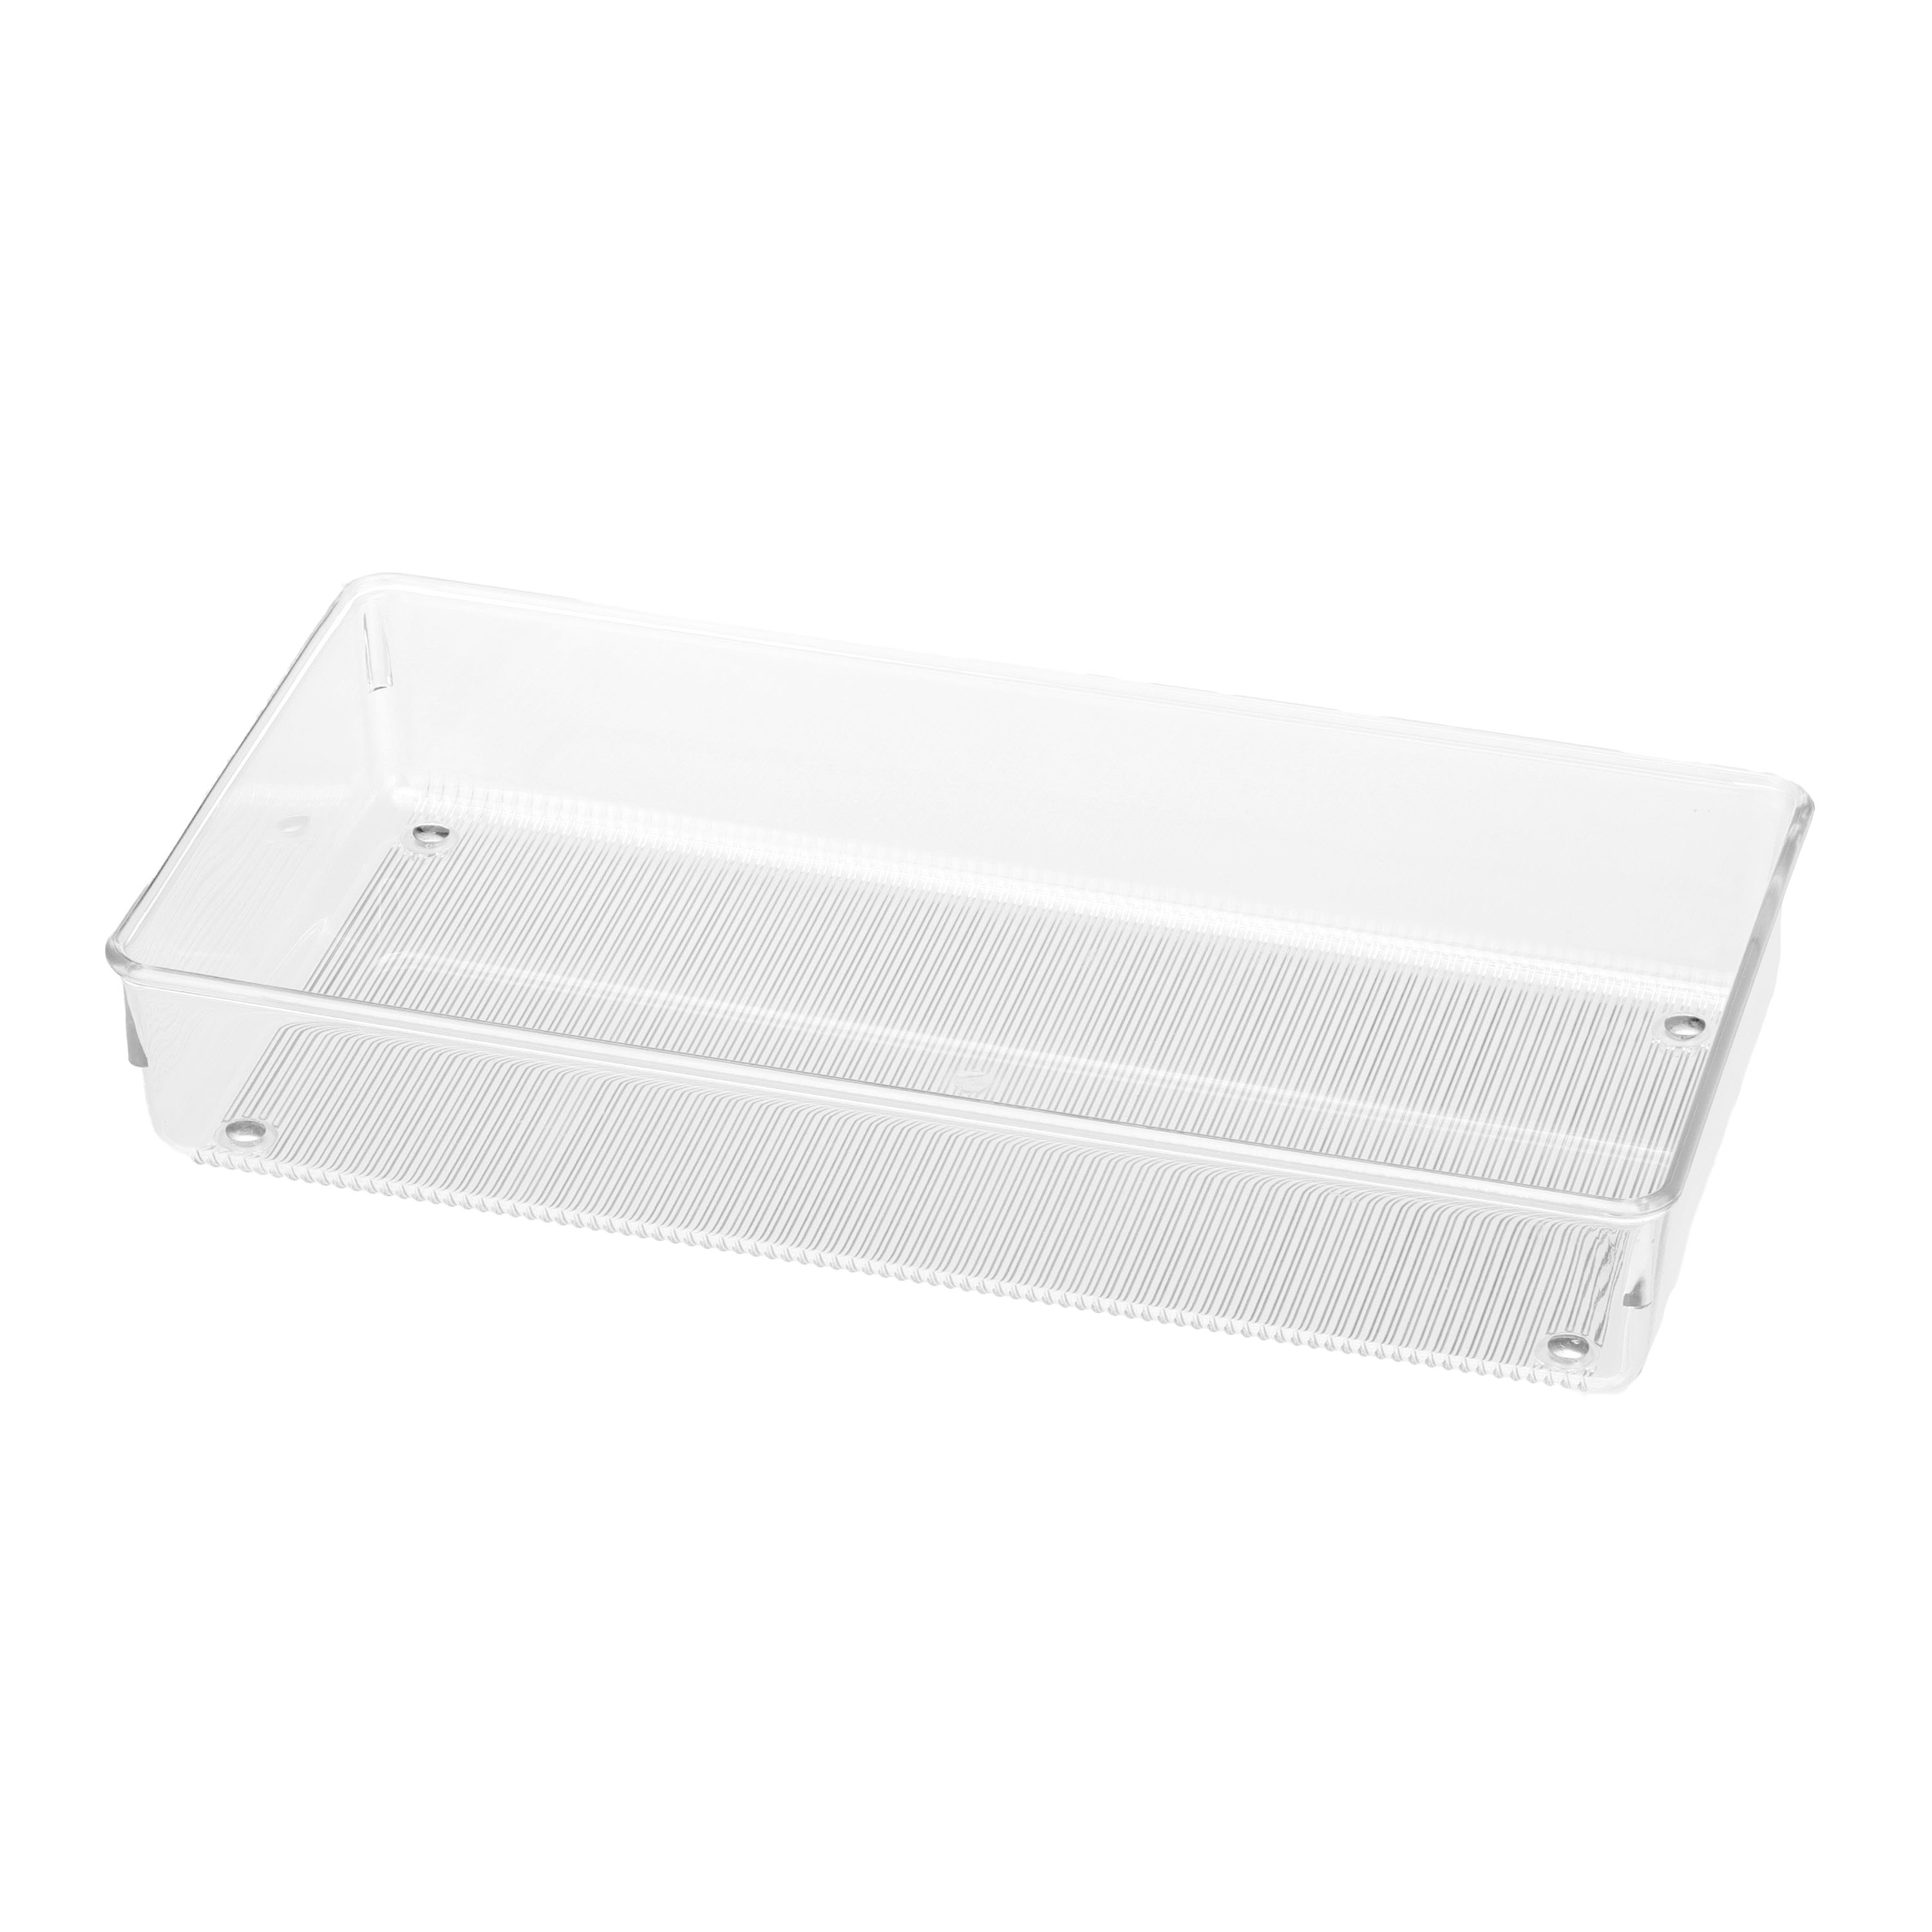 Simplify 12.52-in x 4.06-in Gray Plastic Stackable Drawer Divider